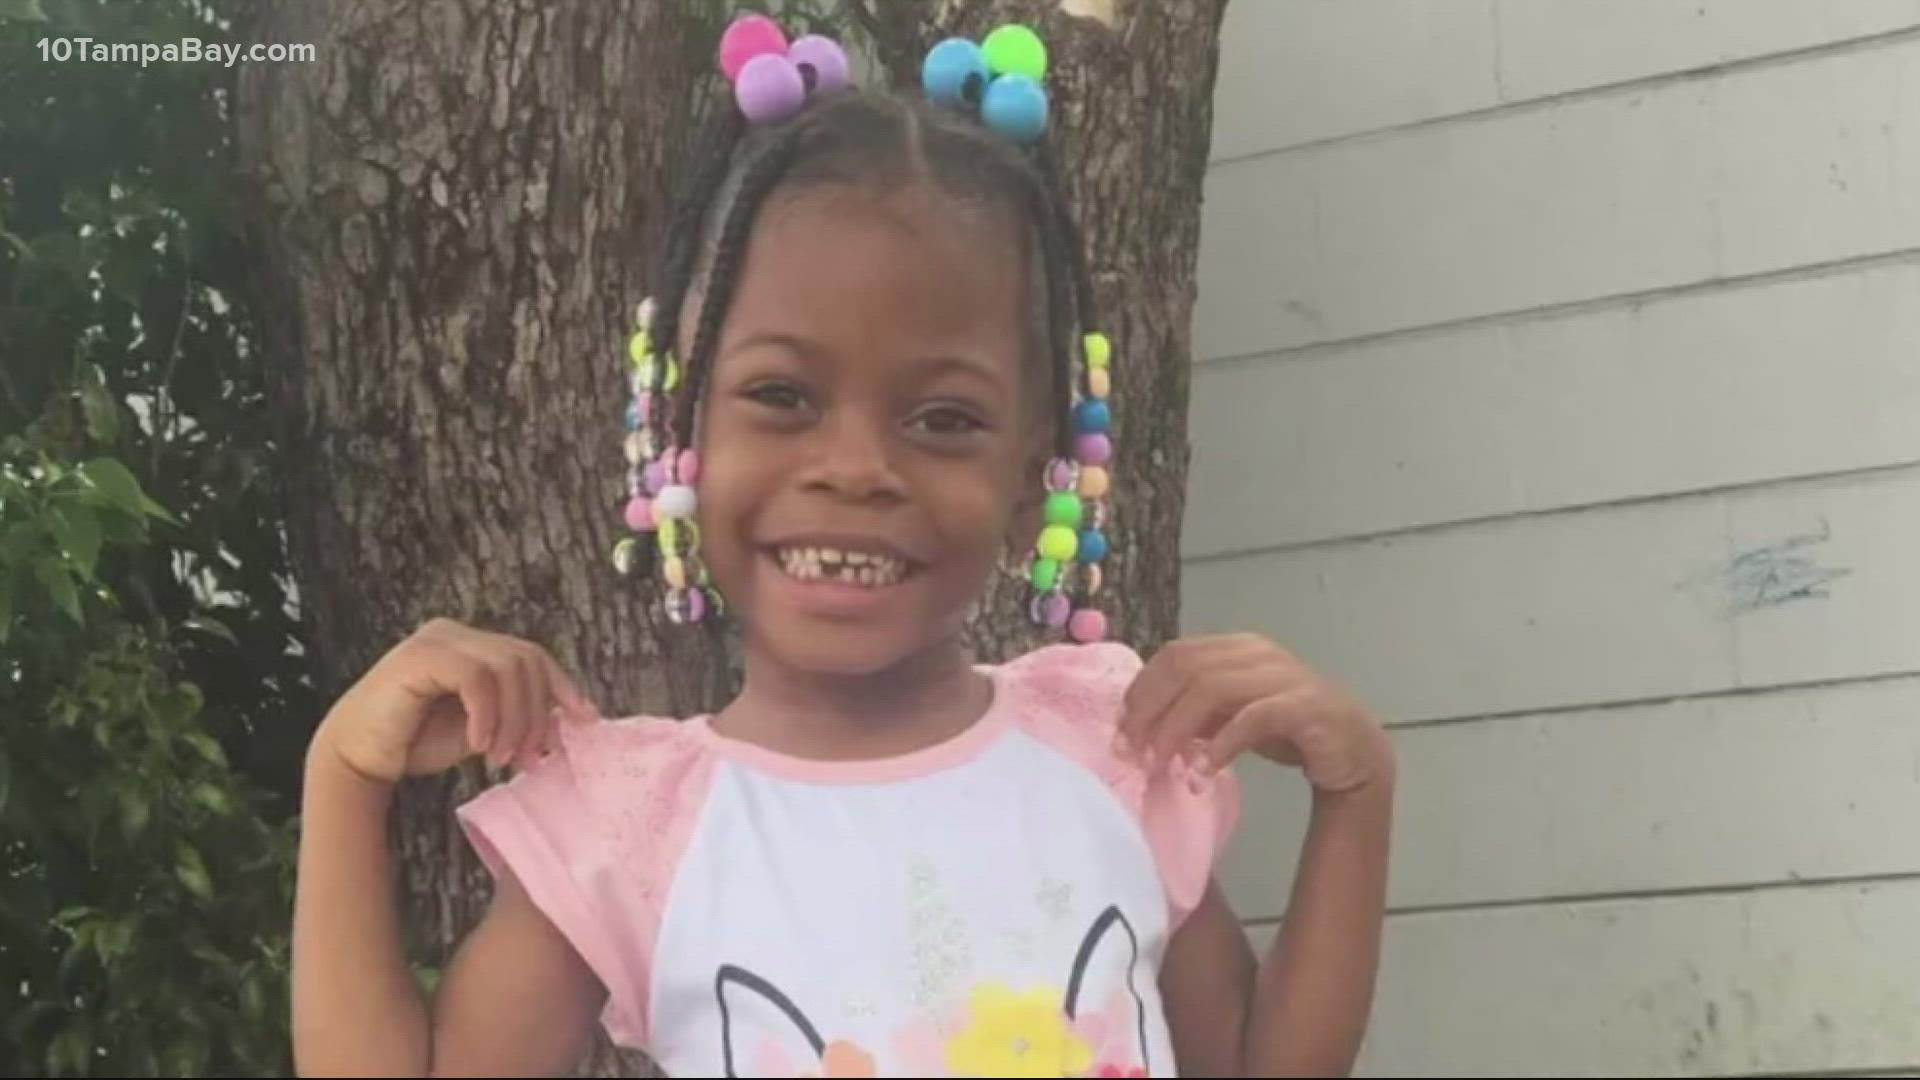 Despite efforts to save her, the 4-year-old died at the hospital.